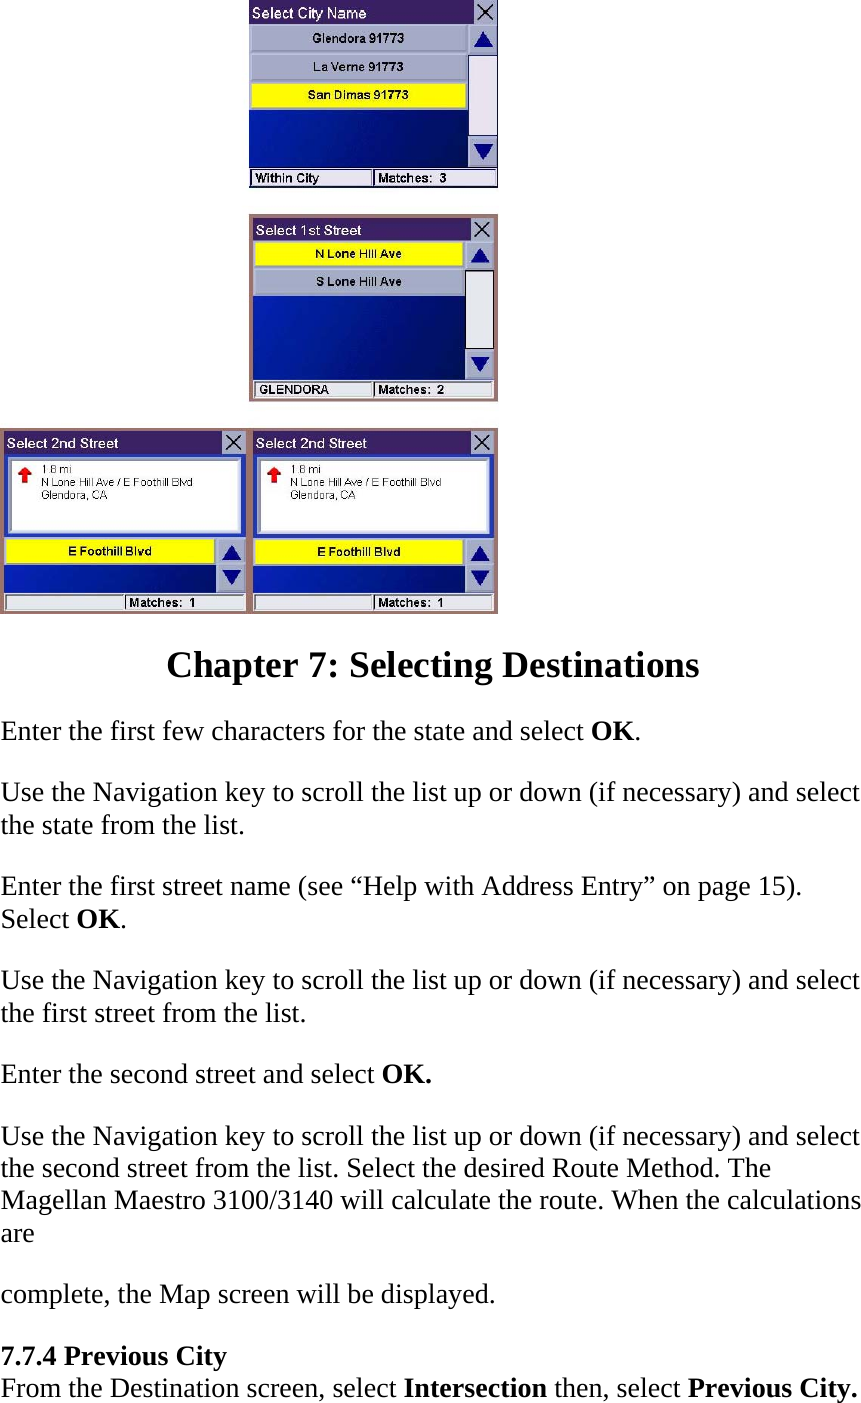  Chapter 7: Selecting Destinations  Enter the first few characters for the state and select OK.  Use the Navigation key to scroll the list up or down (if necessary) and select the state from the list.  Enter the first street name (see “Help with Address Entry” on page 15). Select OK.  Use the Navigation key to scroll the list up or down (if necessary) and select the first street from the list.  Enter the second street and select OK.  Use the Navigation key to scroll the list up or down (if necessary) and select the second street from the list. Select the desired Route Method. The Magellan Maestro 3100/3140 will calculate the route. When the calculations are  complete, the Map screen will be displayed.  7.7.4 Previous City  From the Destination screen, select Intersection then, select Previous City.  